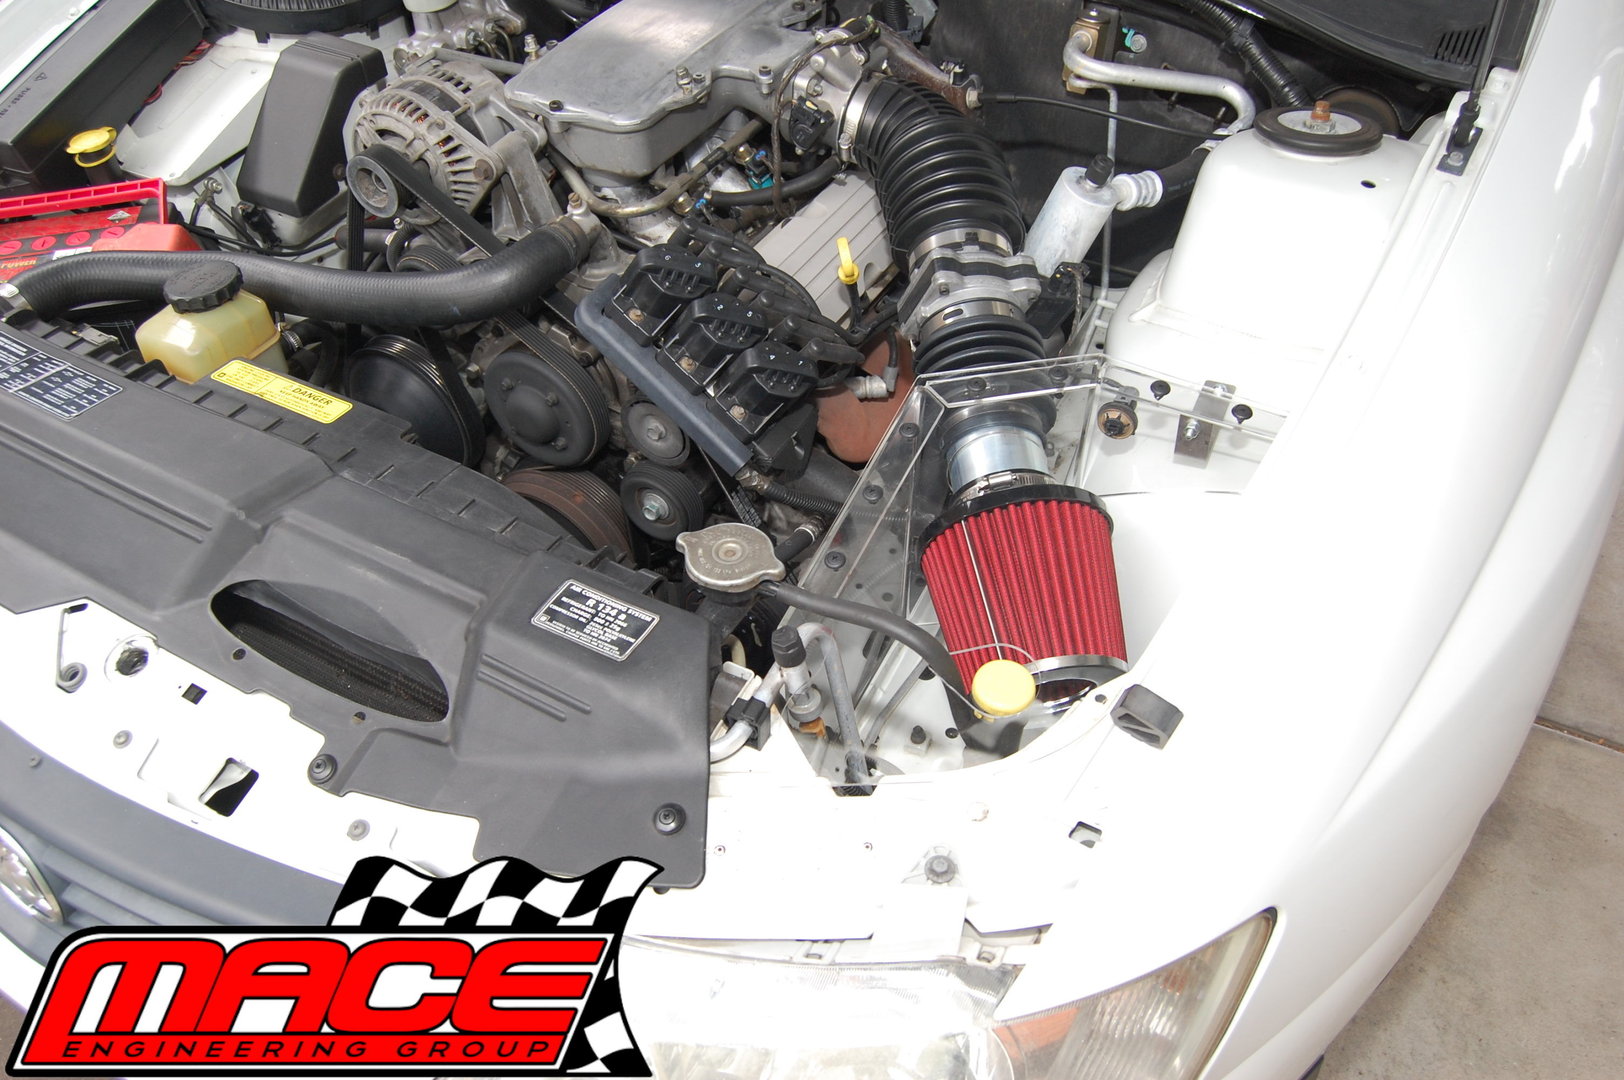 MACE PERFORMANCE COLD AIR INTAKE KIT FOR HOLDEN CREWMAN VY ECOTEC L36 3.8L V6 